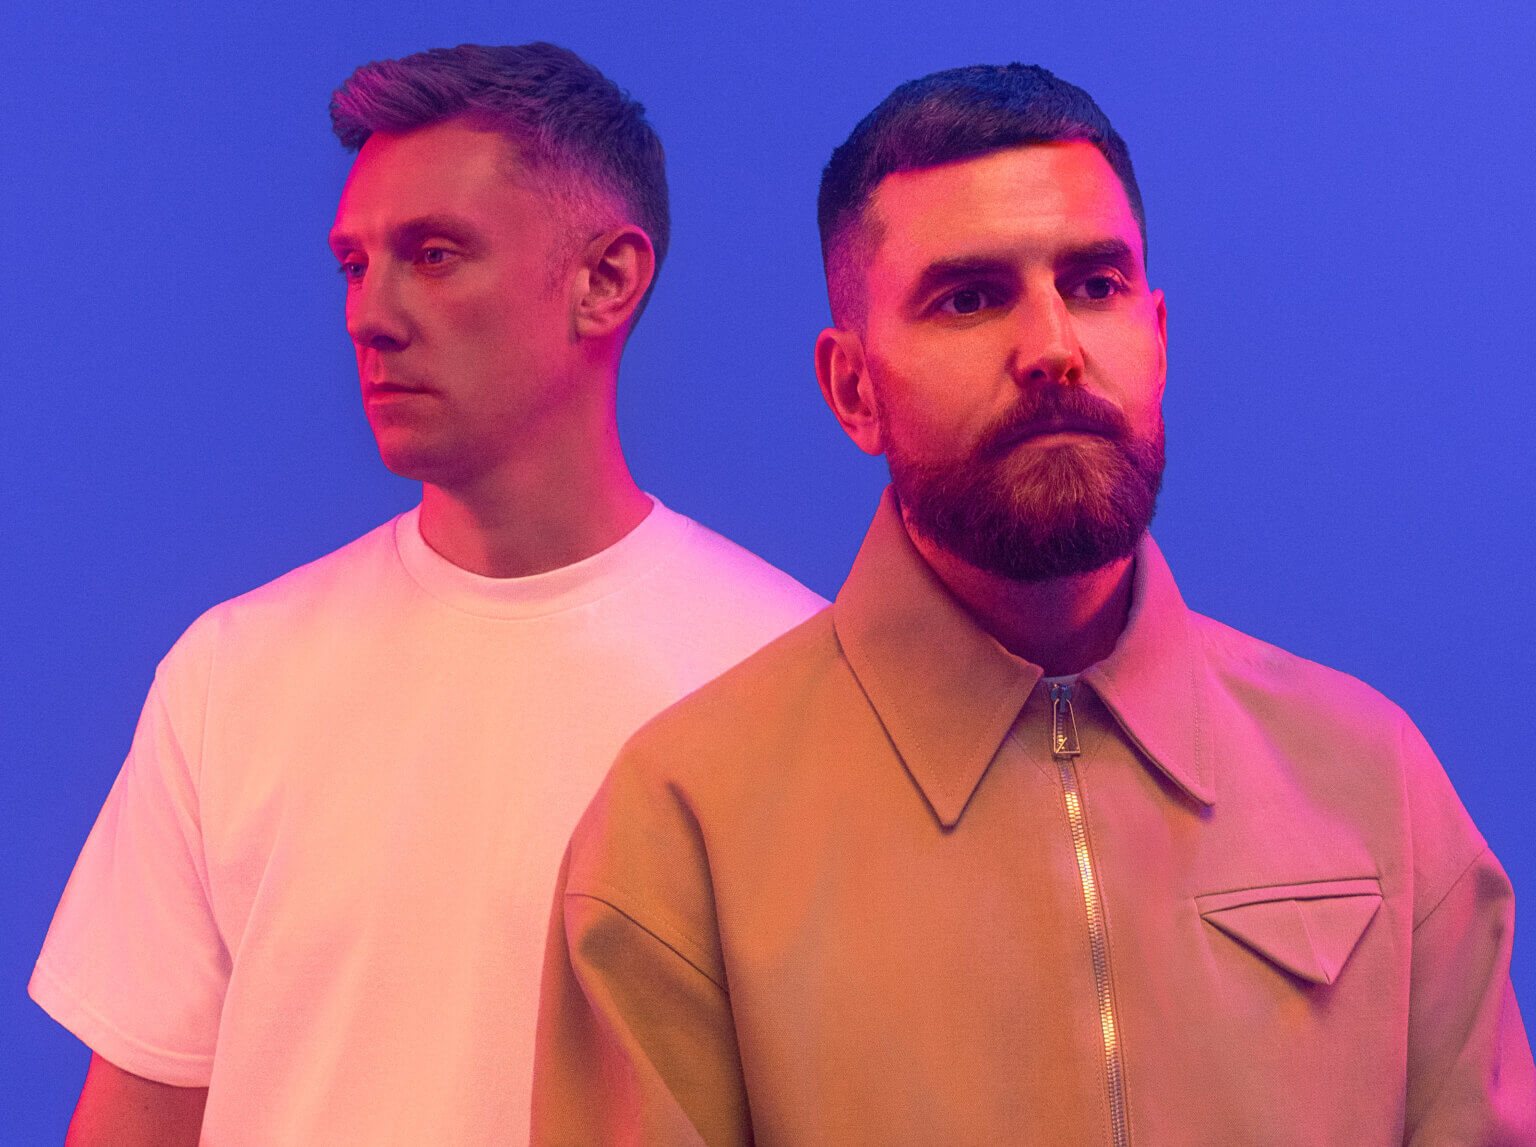 Bicep has shared their first new single “Water” featuring vocalist Clara La San. The track is the first since their album Isles.